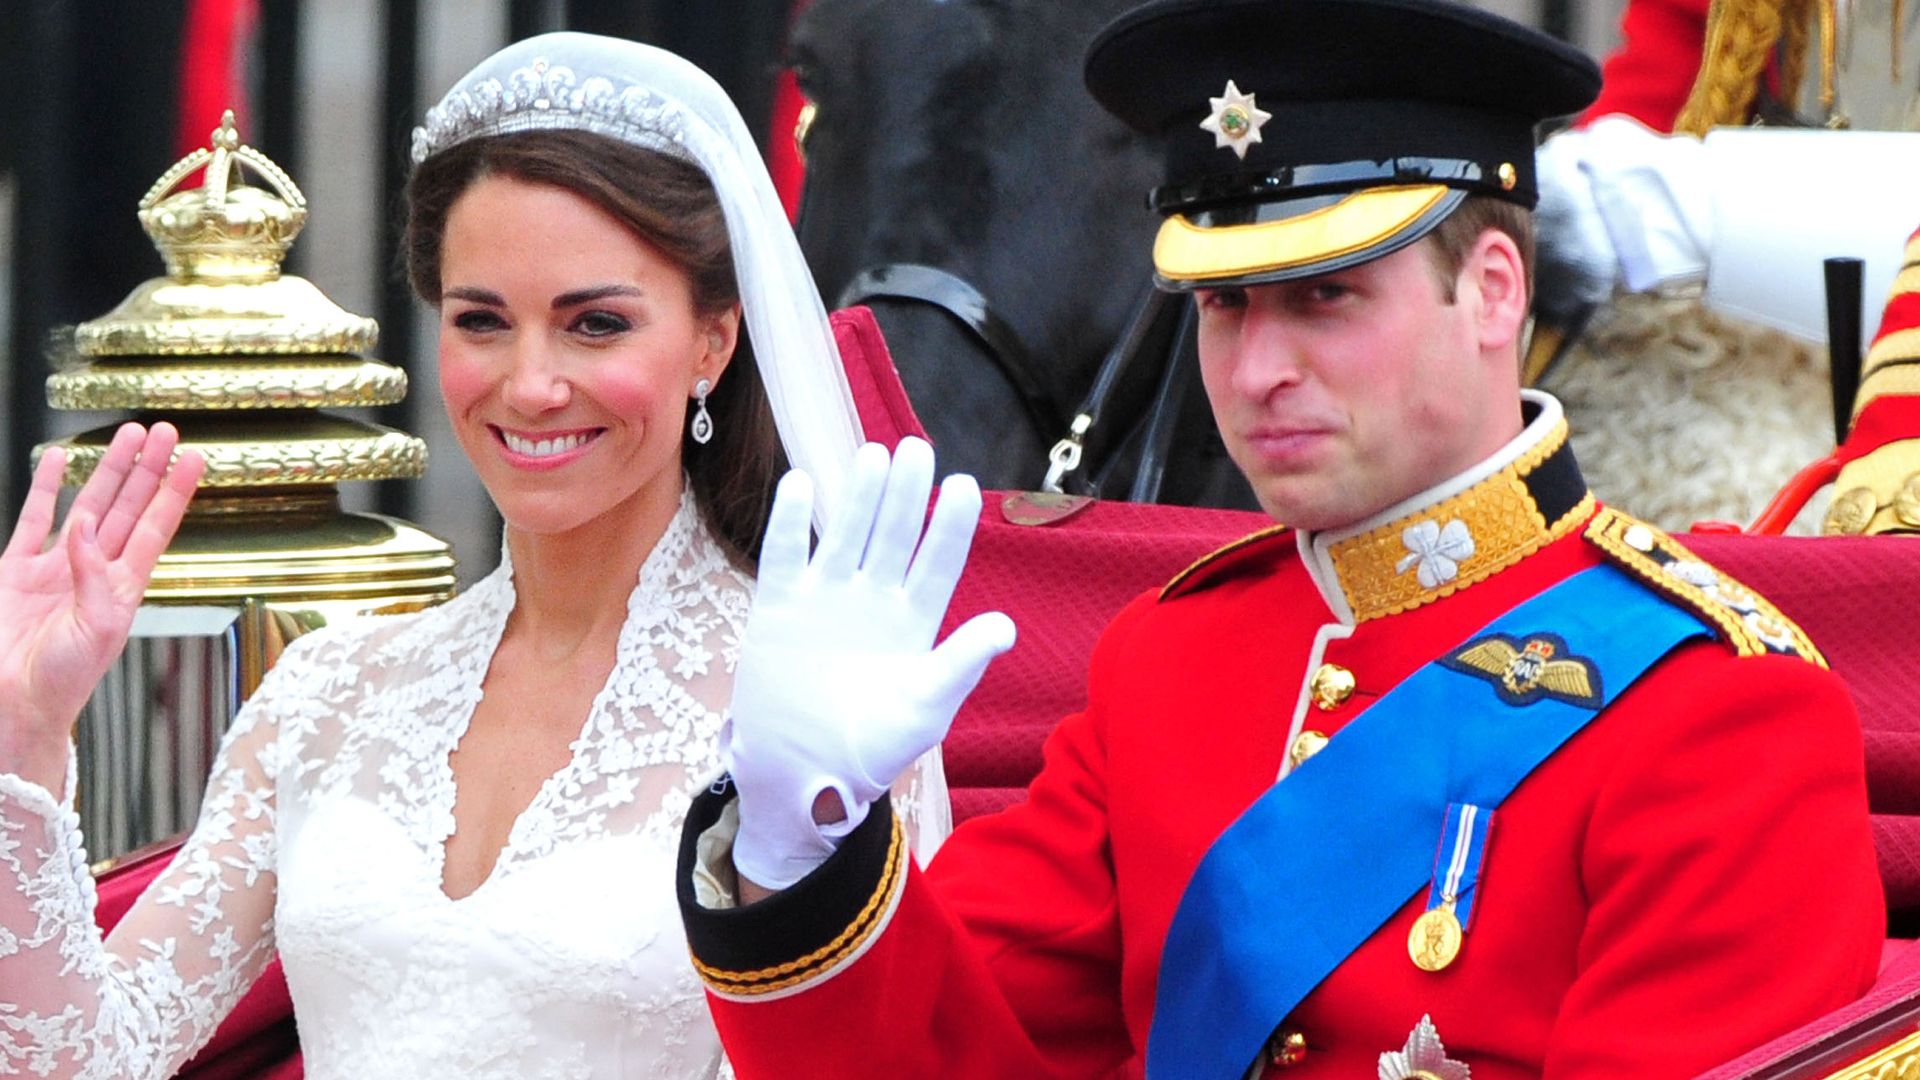 Prince William and Princess Catherine waving in their wedding carriage